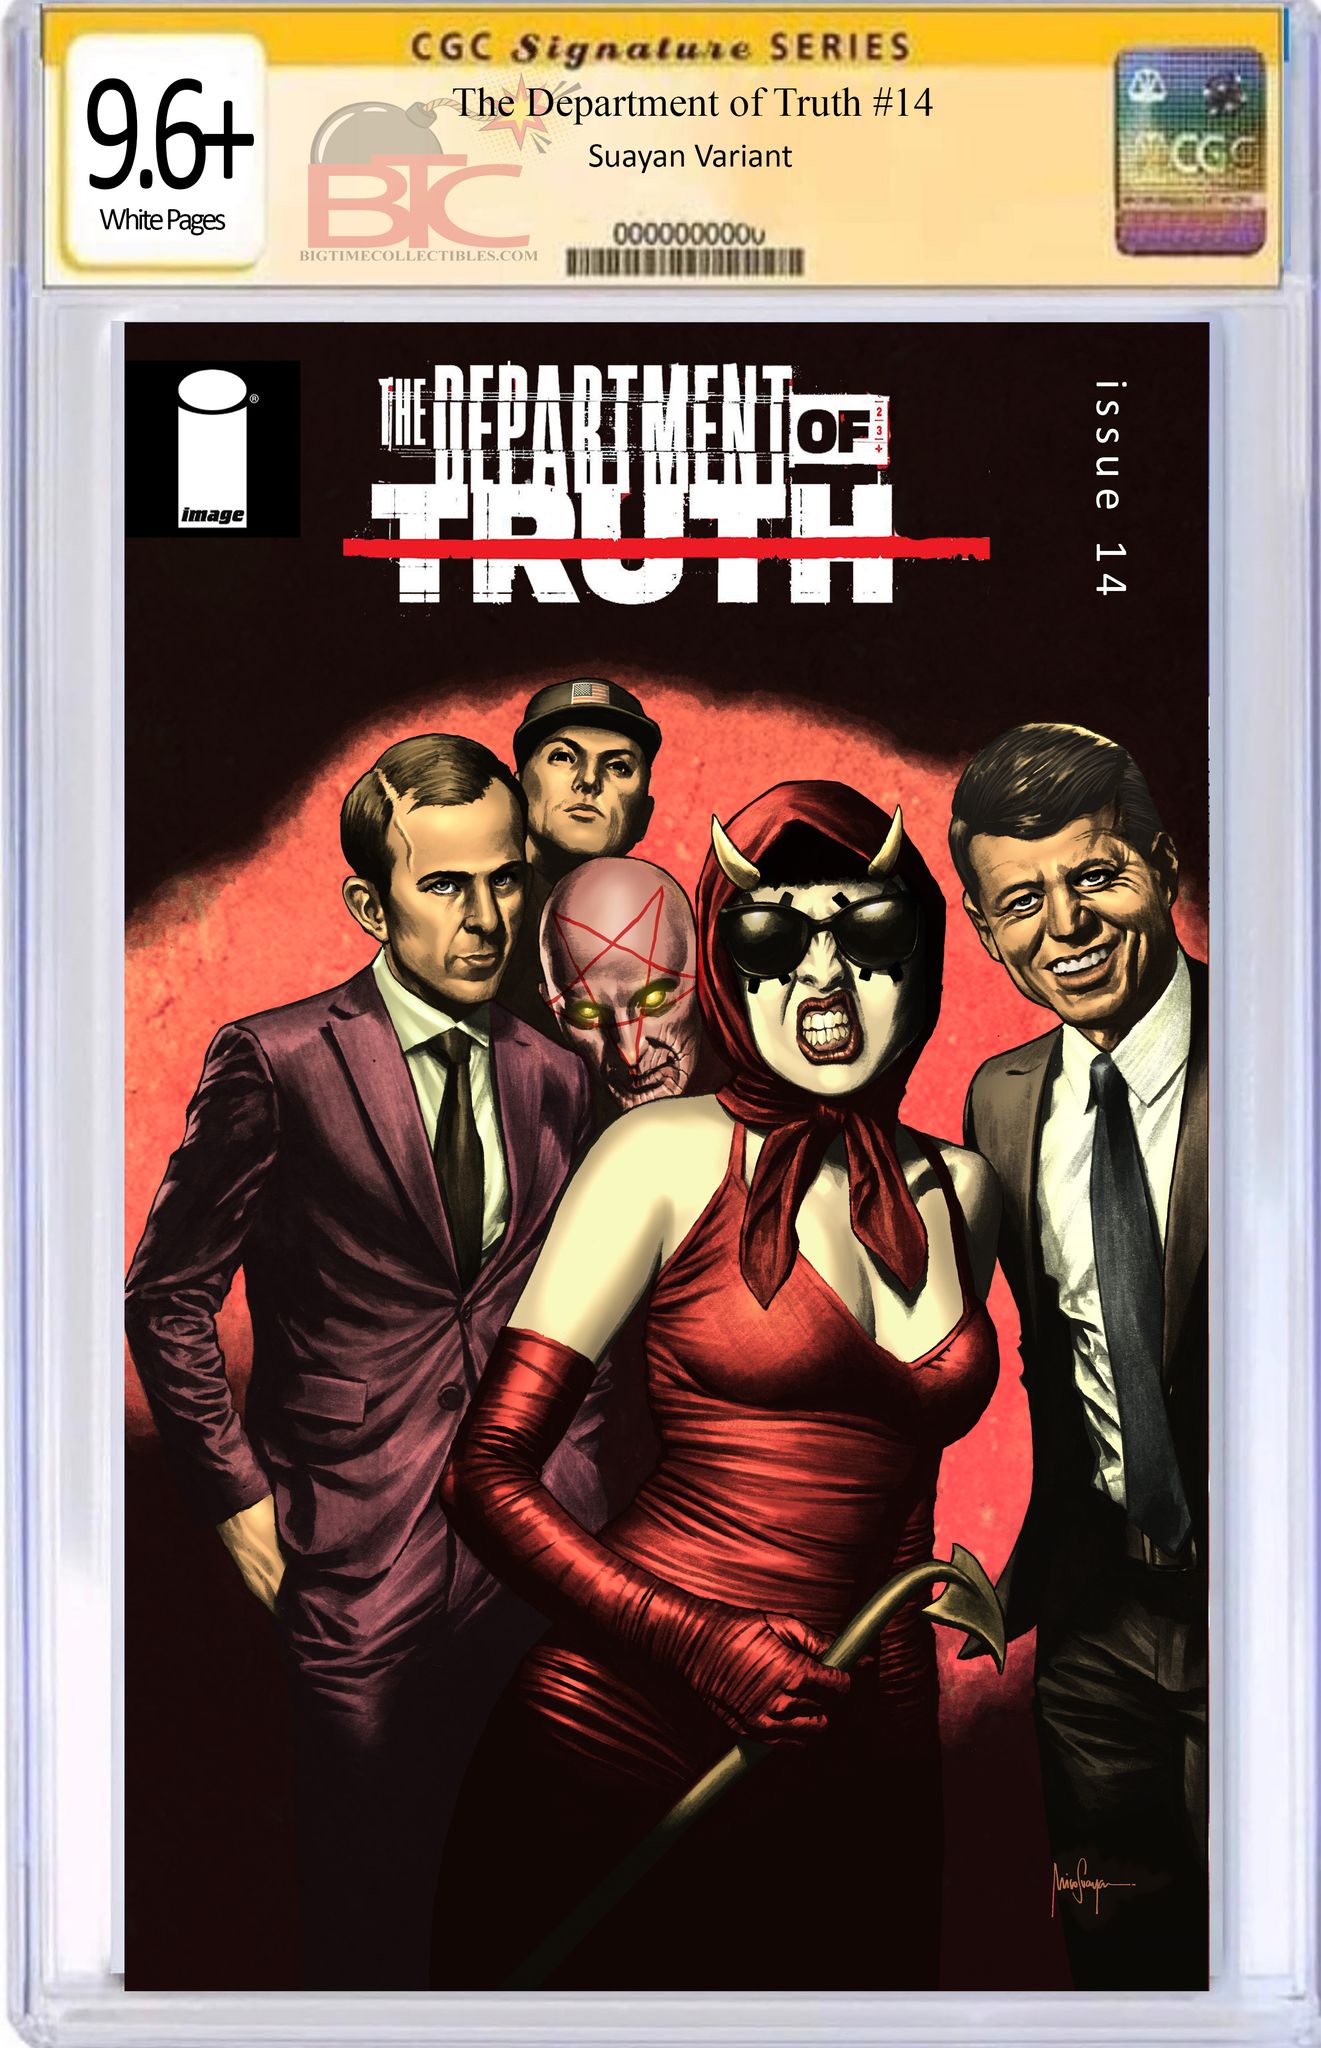 DEPARTMENT OF TRUTH #14 MICO SUAYAN "HIGHWAY TO HELL" EXCLUSIVE VARIANT